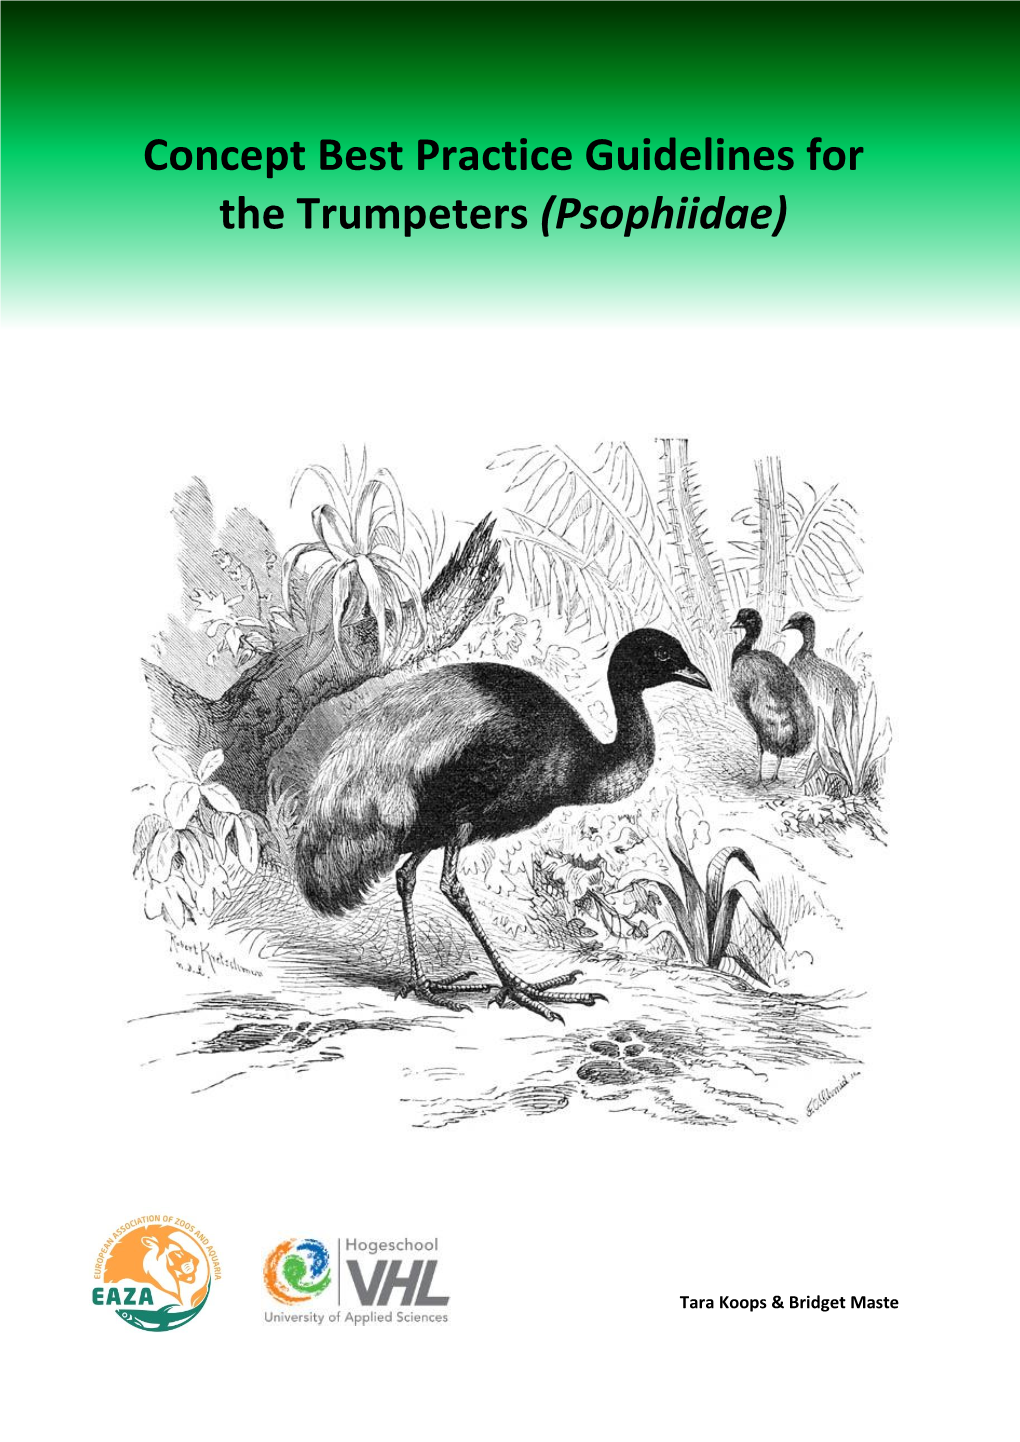 Concept Best Practice Guidelines for the Trumpeters (Psophiidae)